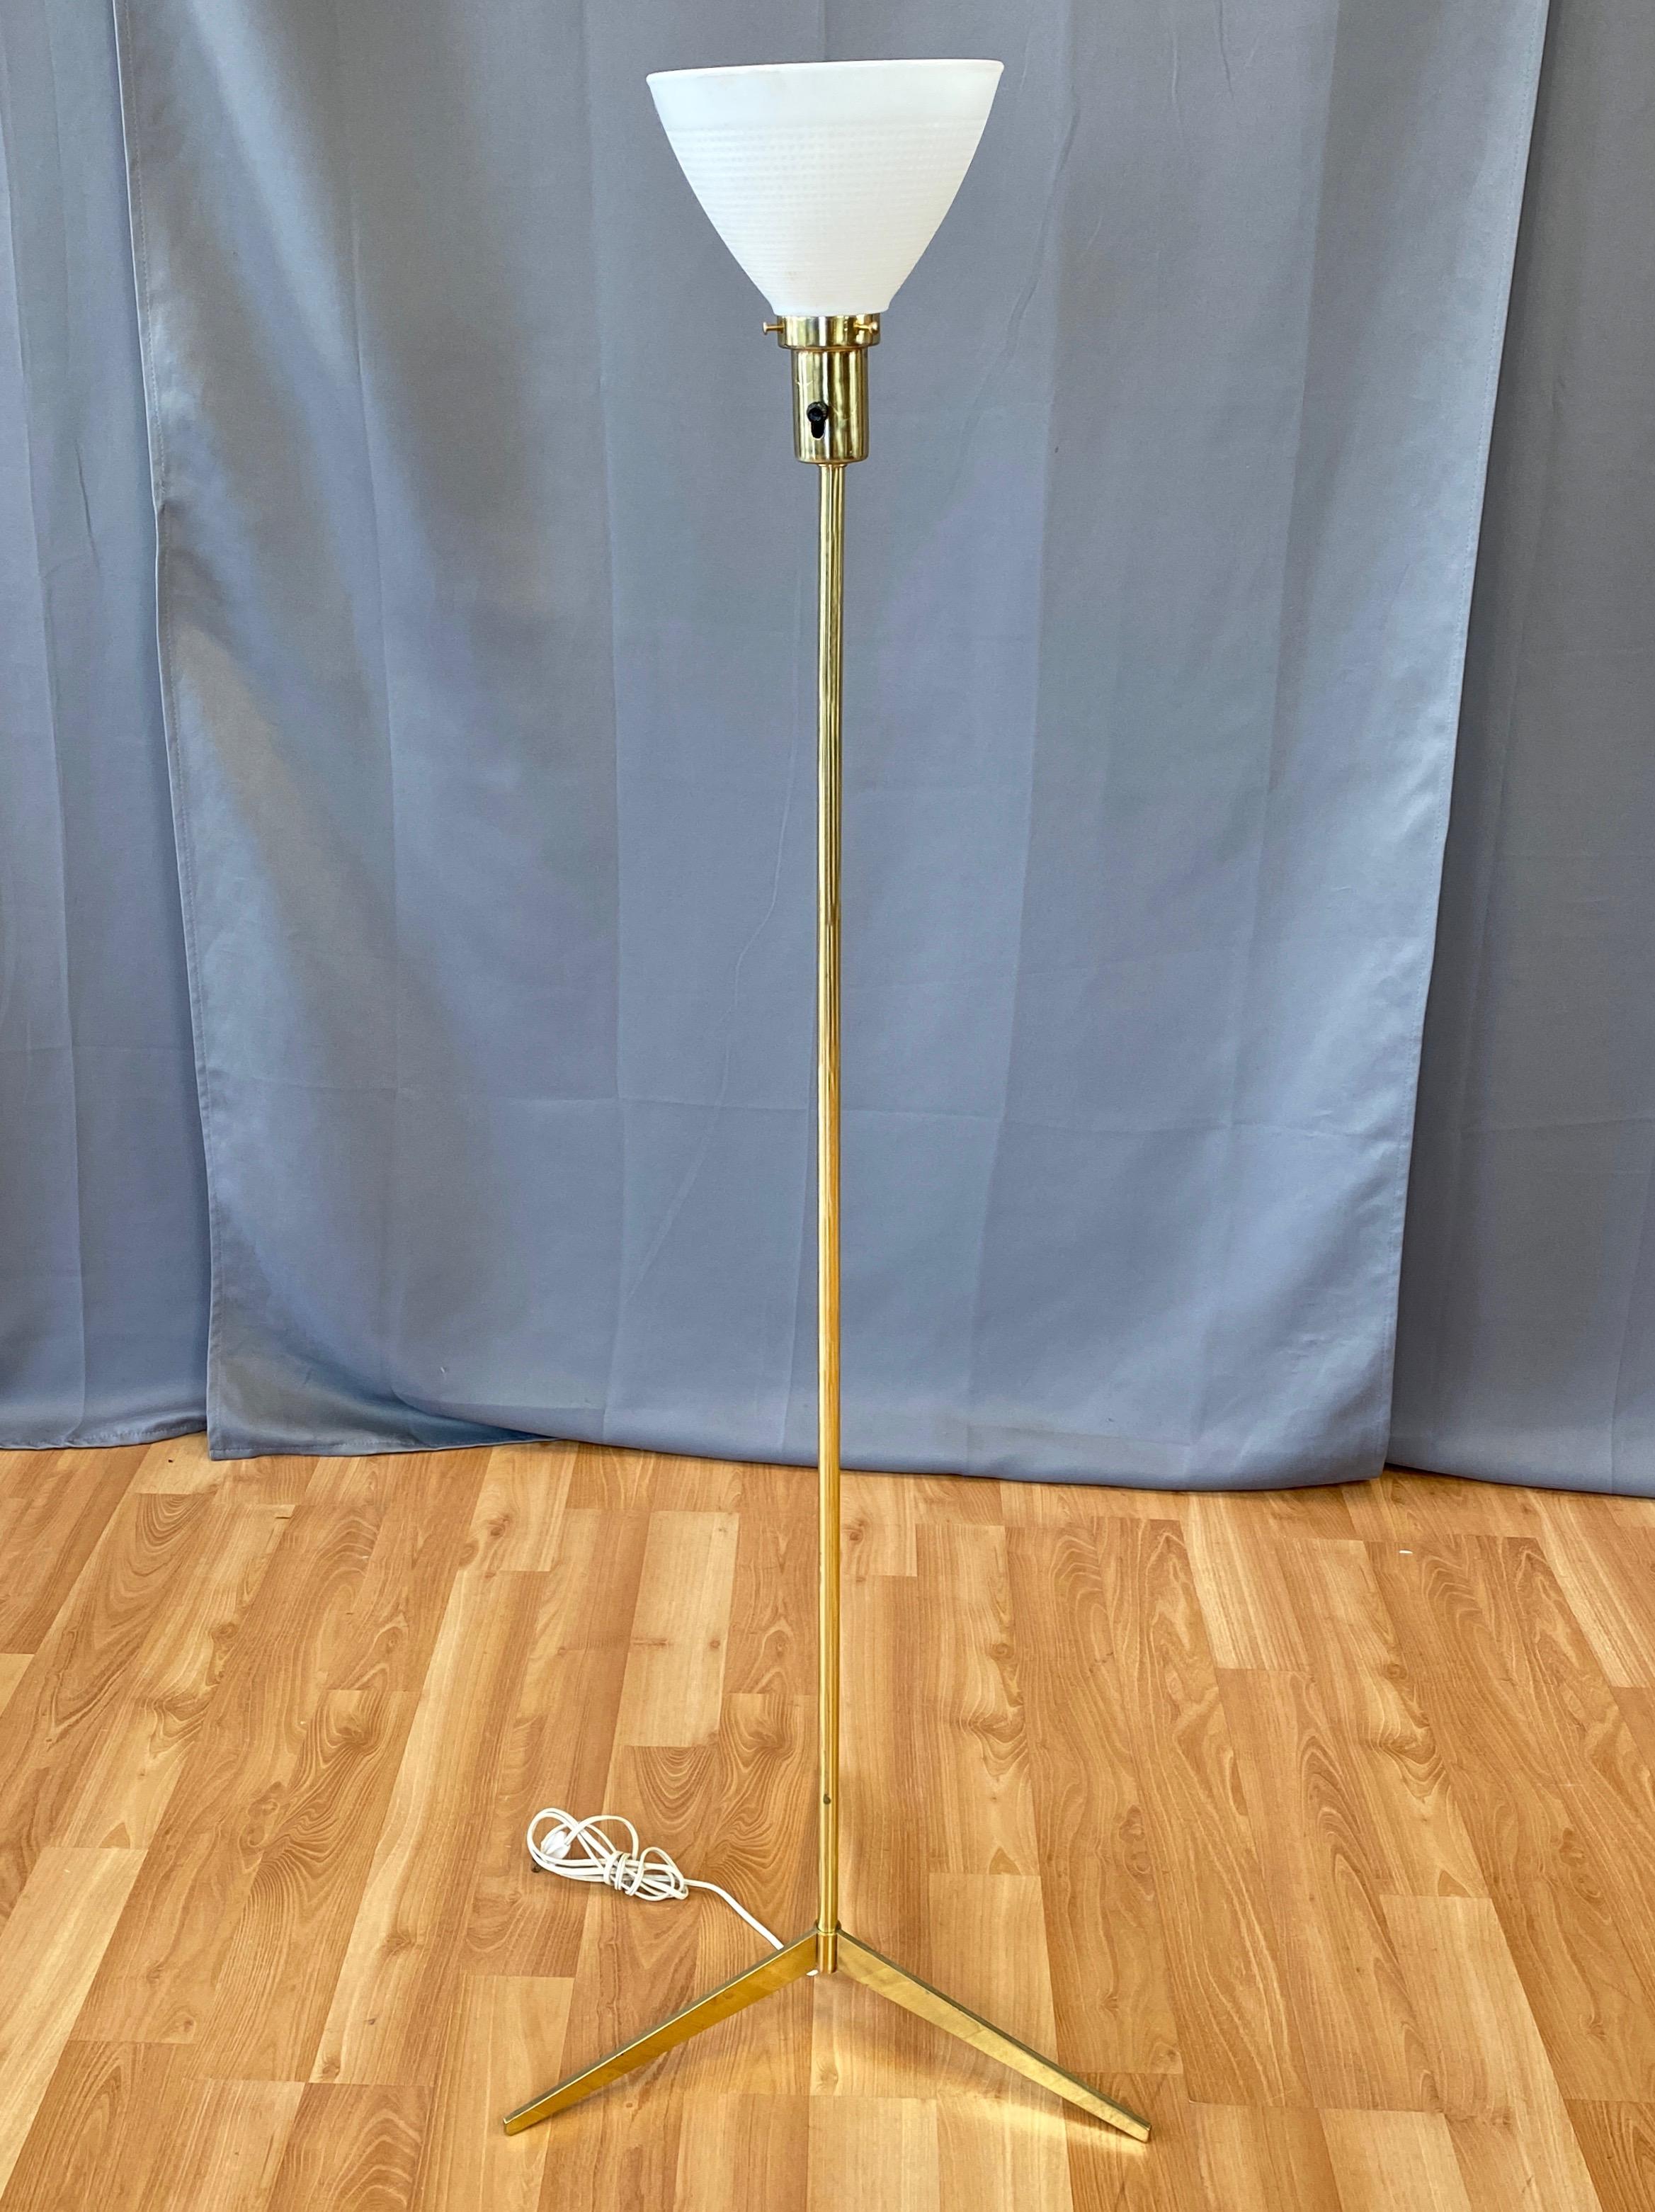 A sleek 1950s brass tripod base floor lamp by Laurel Lamp Company in the style of Paul McCobb.

Blade-like low profile three-point base in solid brass. Narrow tubular brass stem topped by a brass socket with original milk glass diffuser. Minimalist